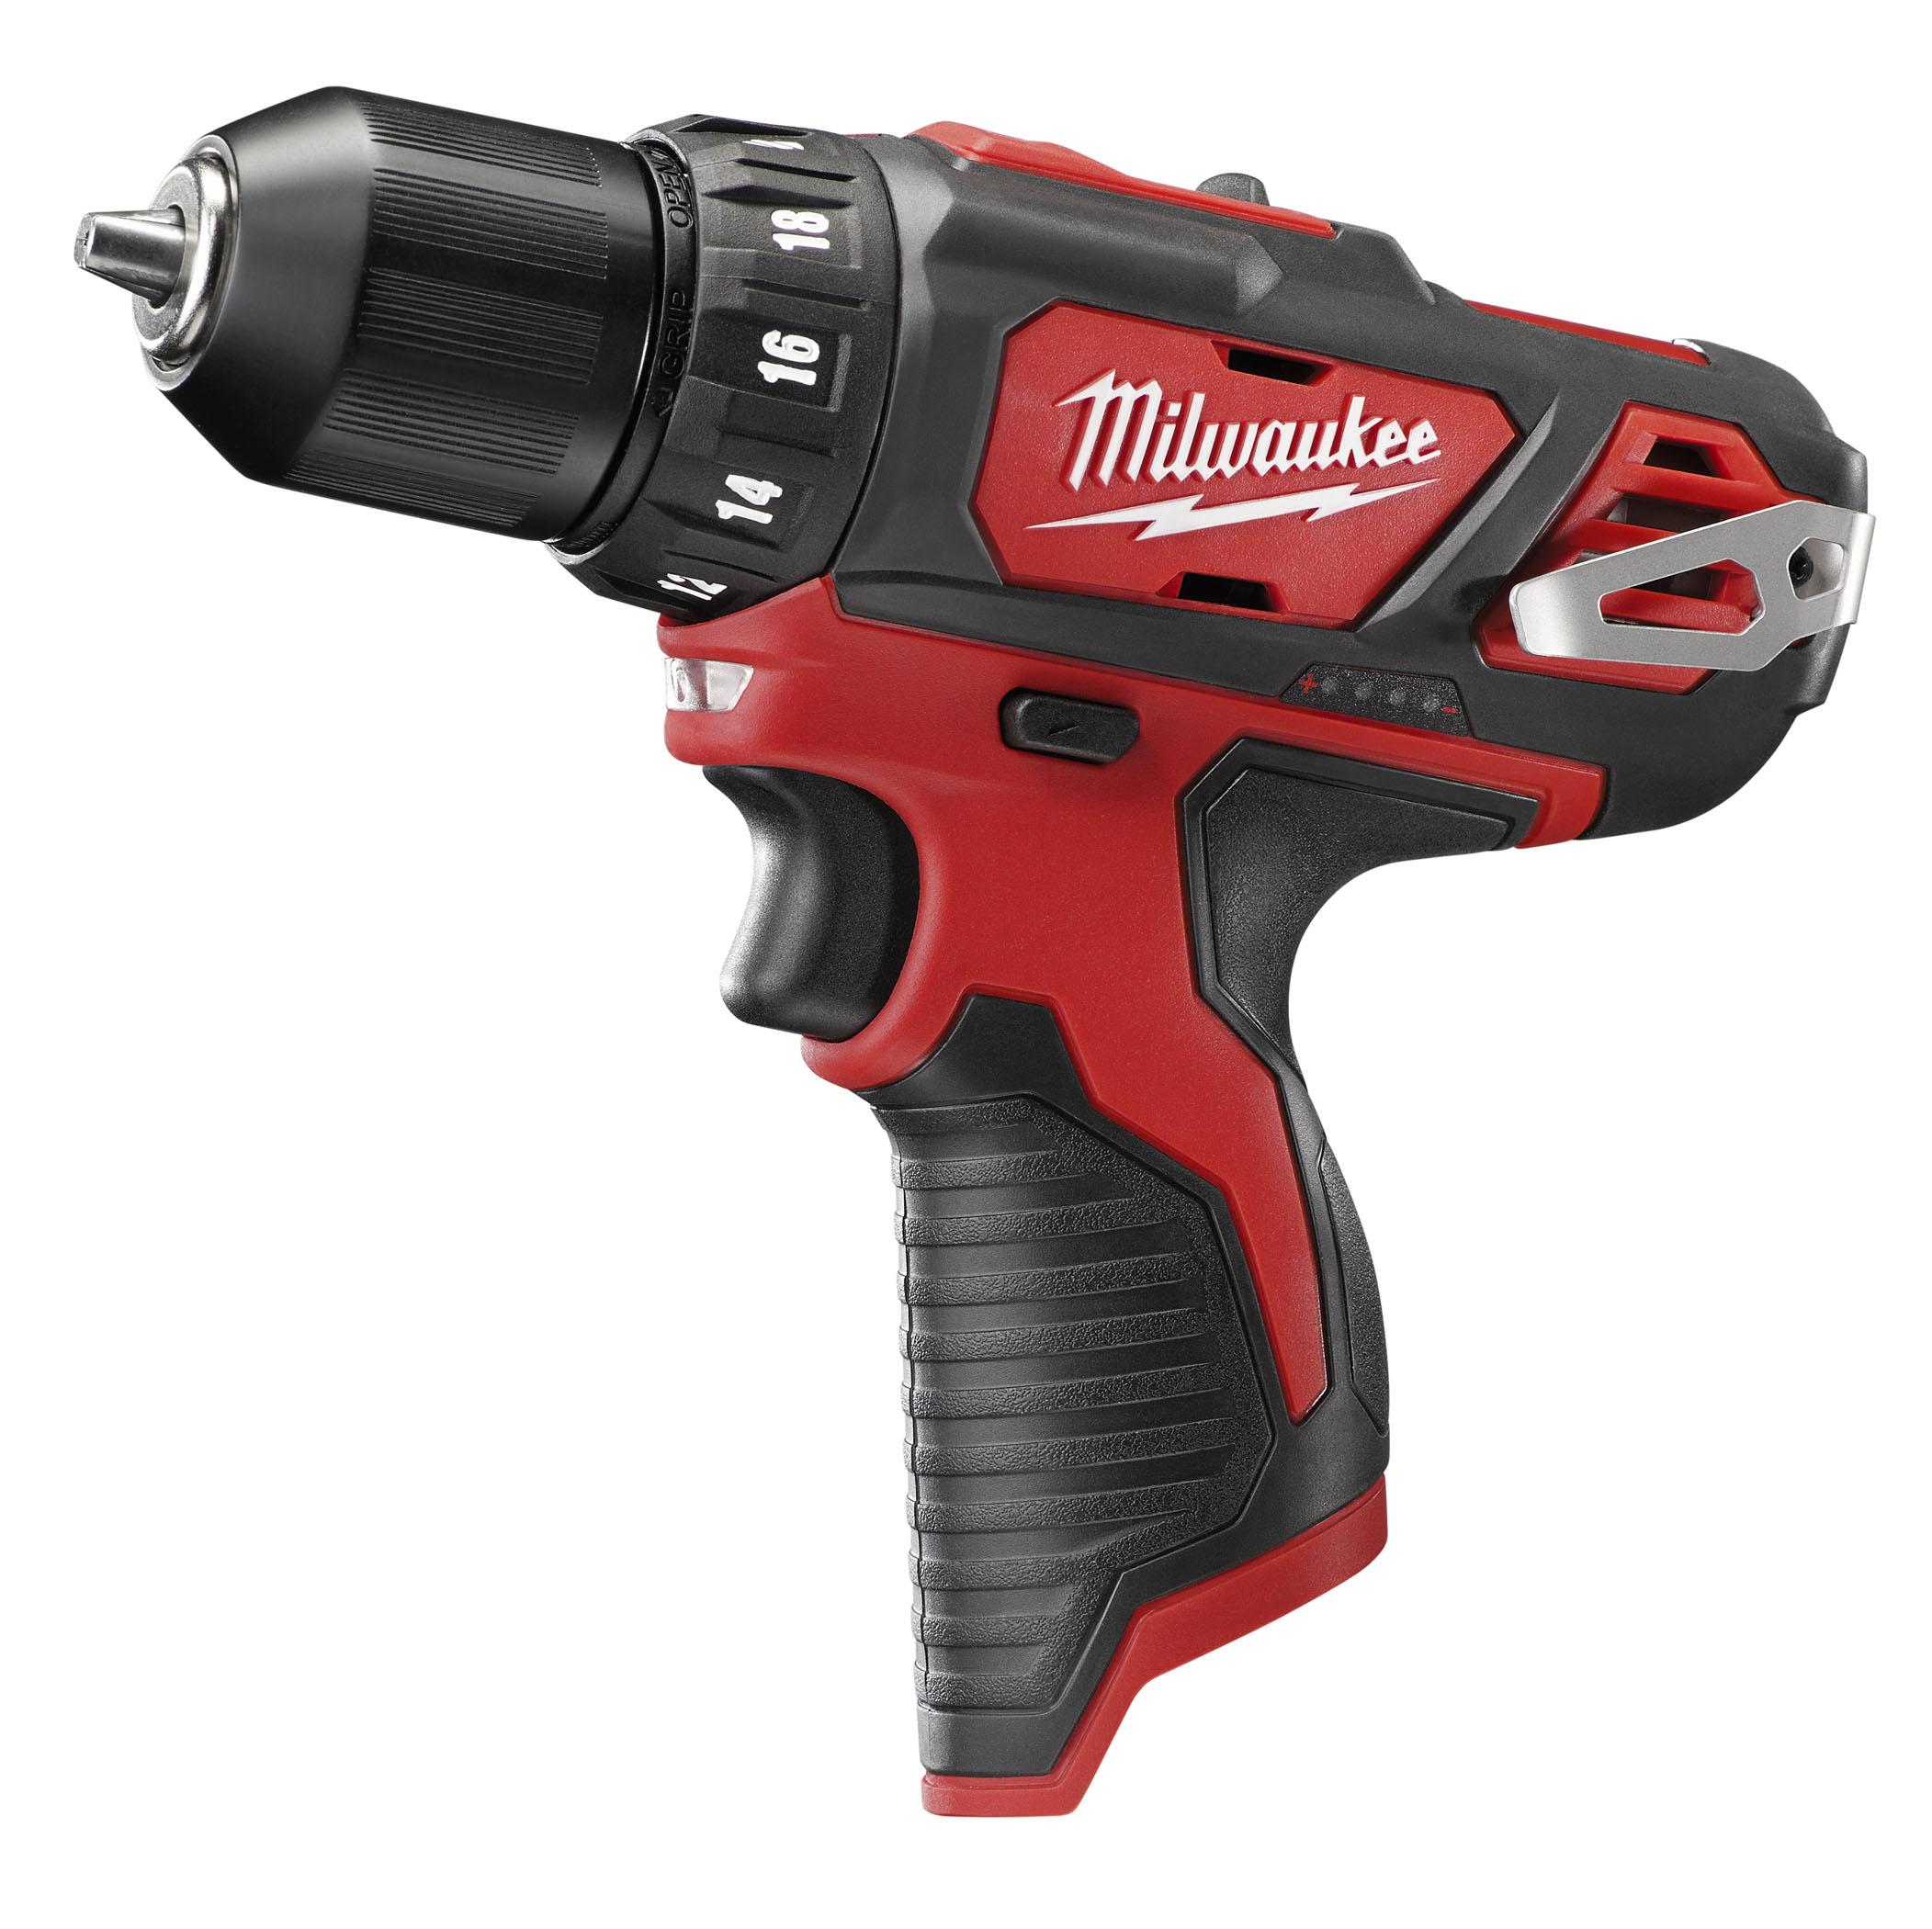 M12 12 Volt Lithium-Ion Cordless 3/8 In.  2 speed Inch Drill Driver